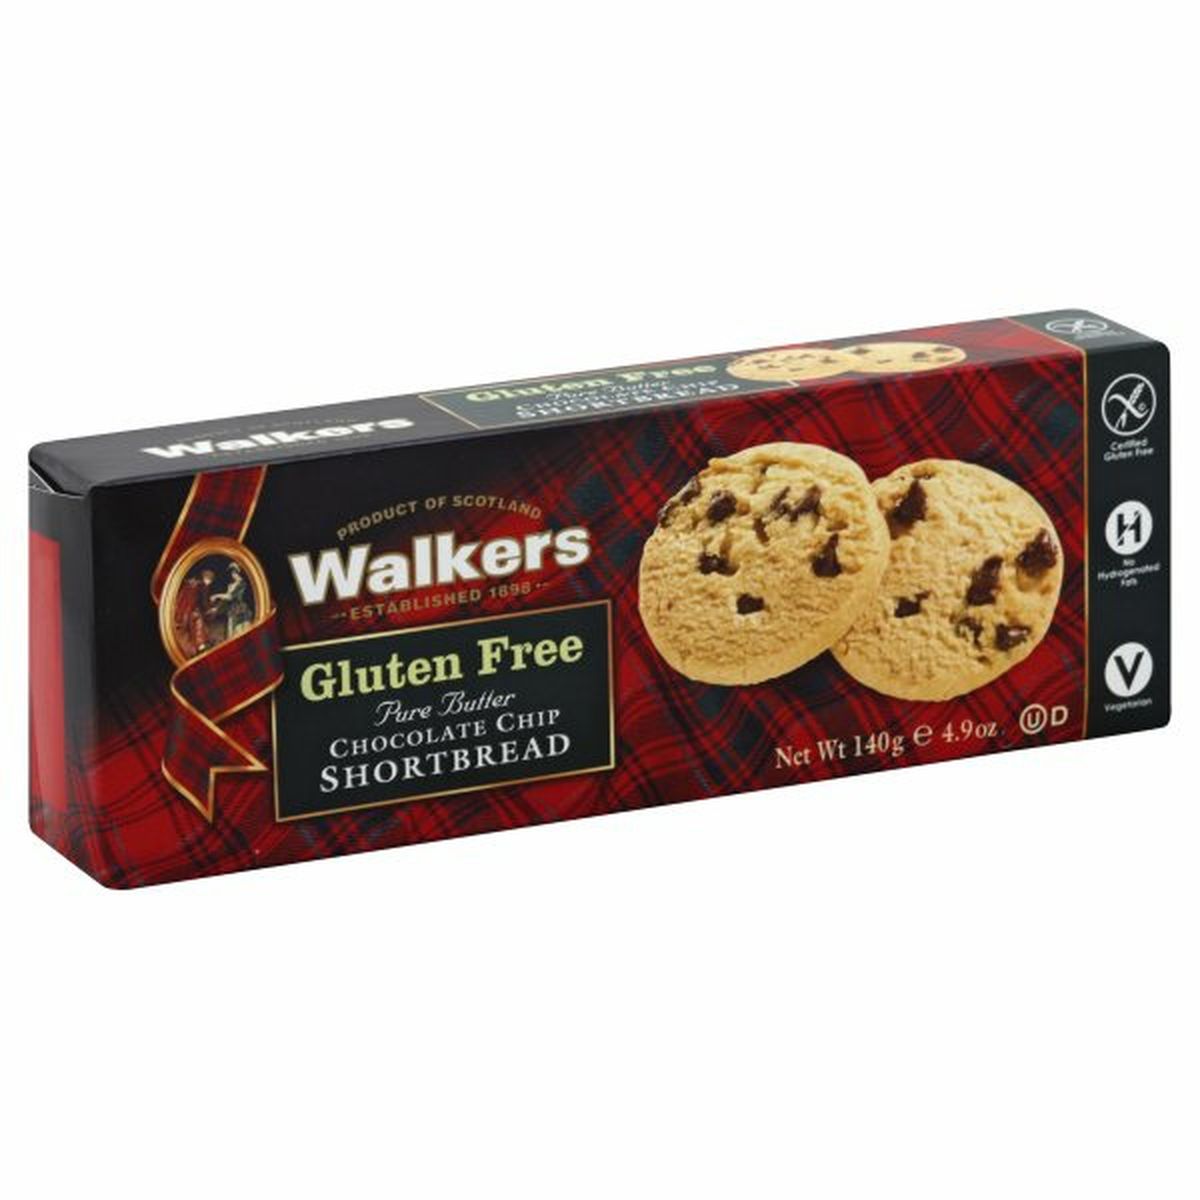 Calories in Walkers Shortbread, Gluten Free, Pure Butter, Chocolate Chip